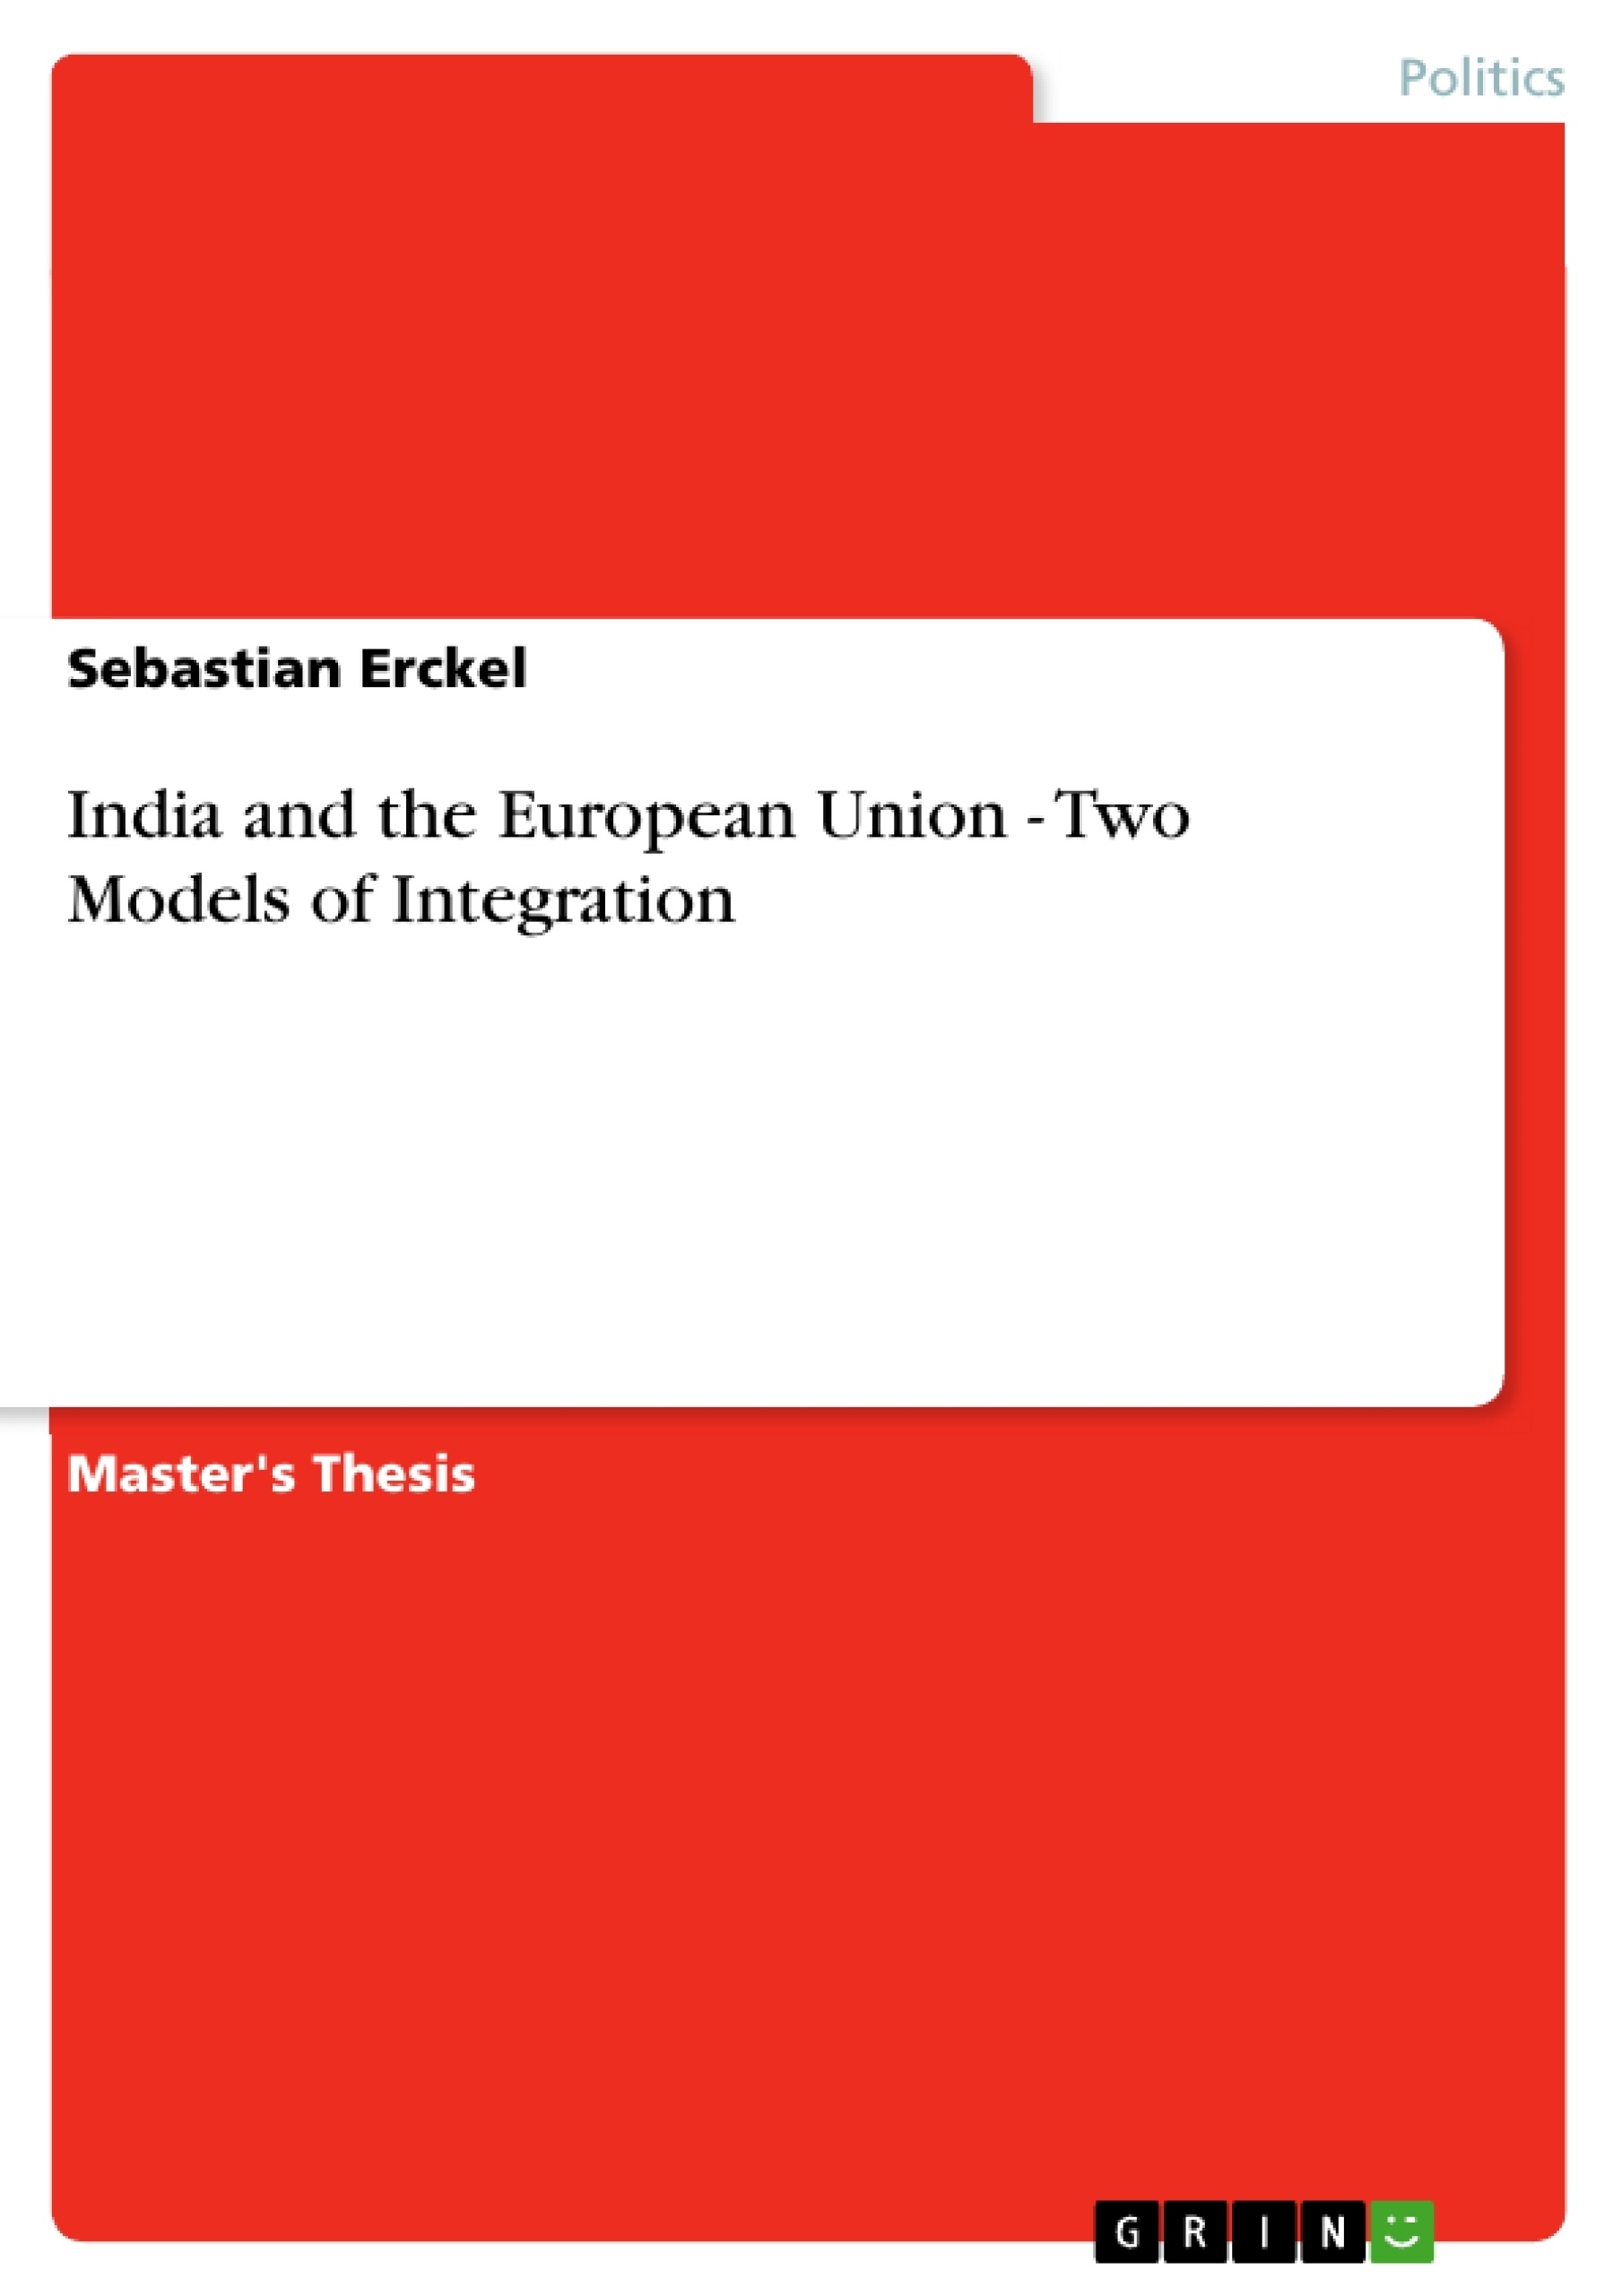 Title: India and the European Union - Two Models of Integration